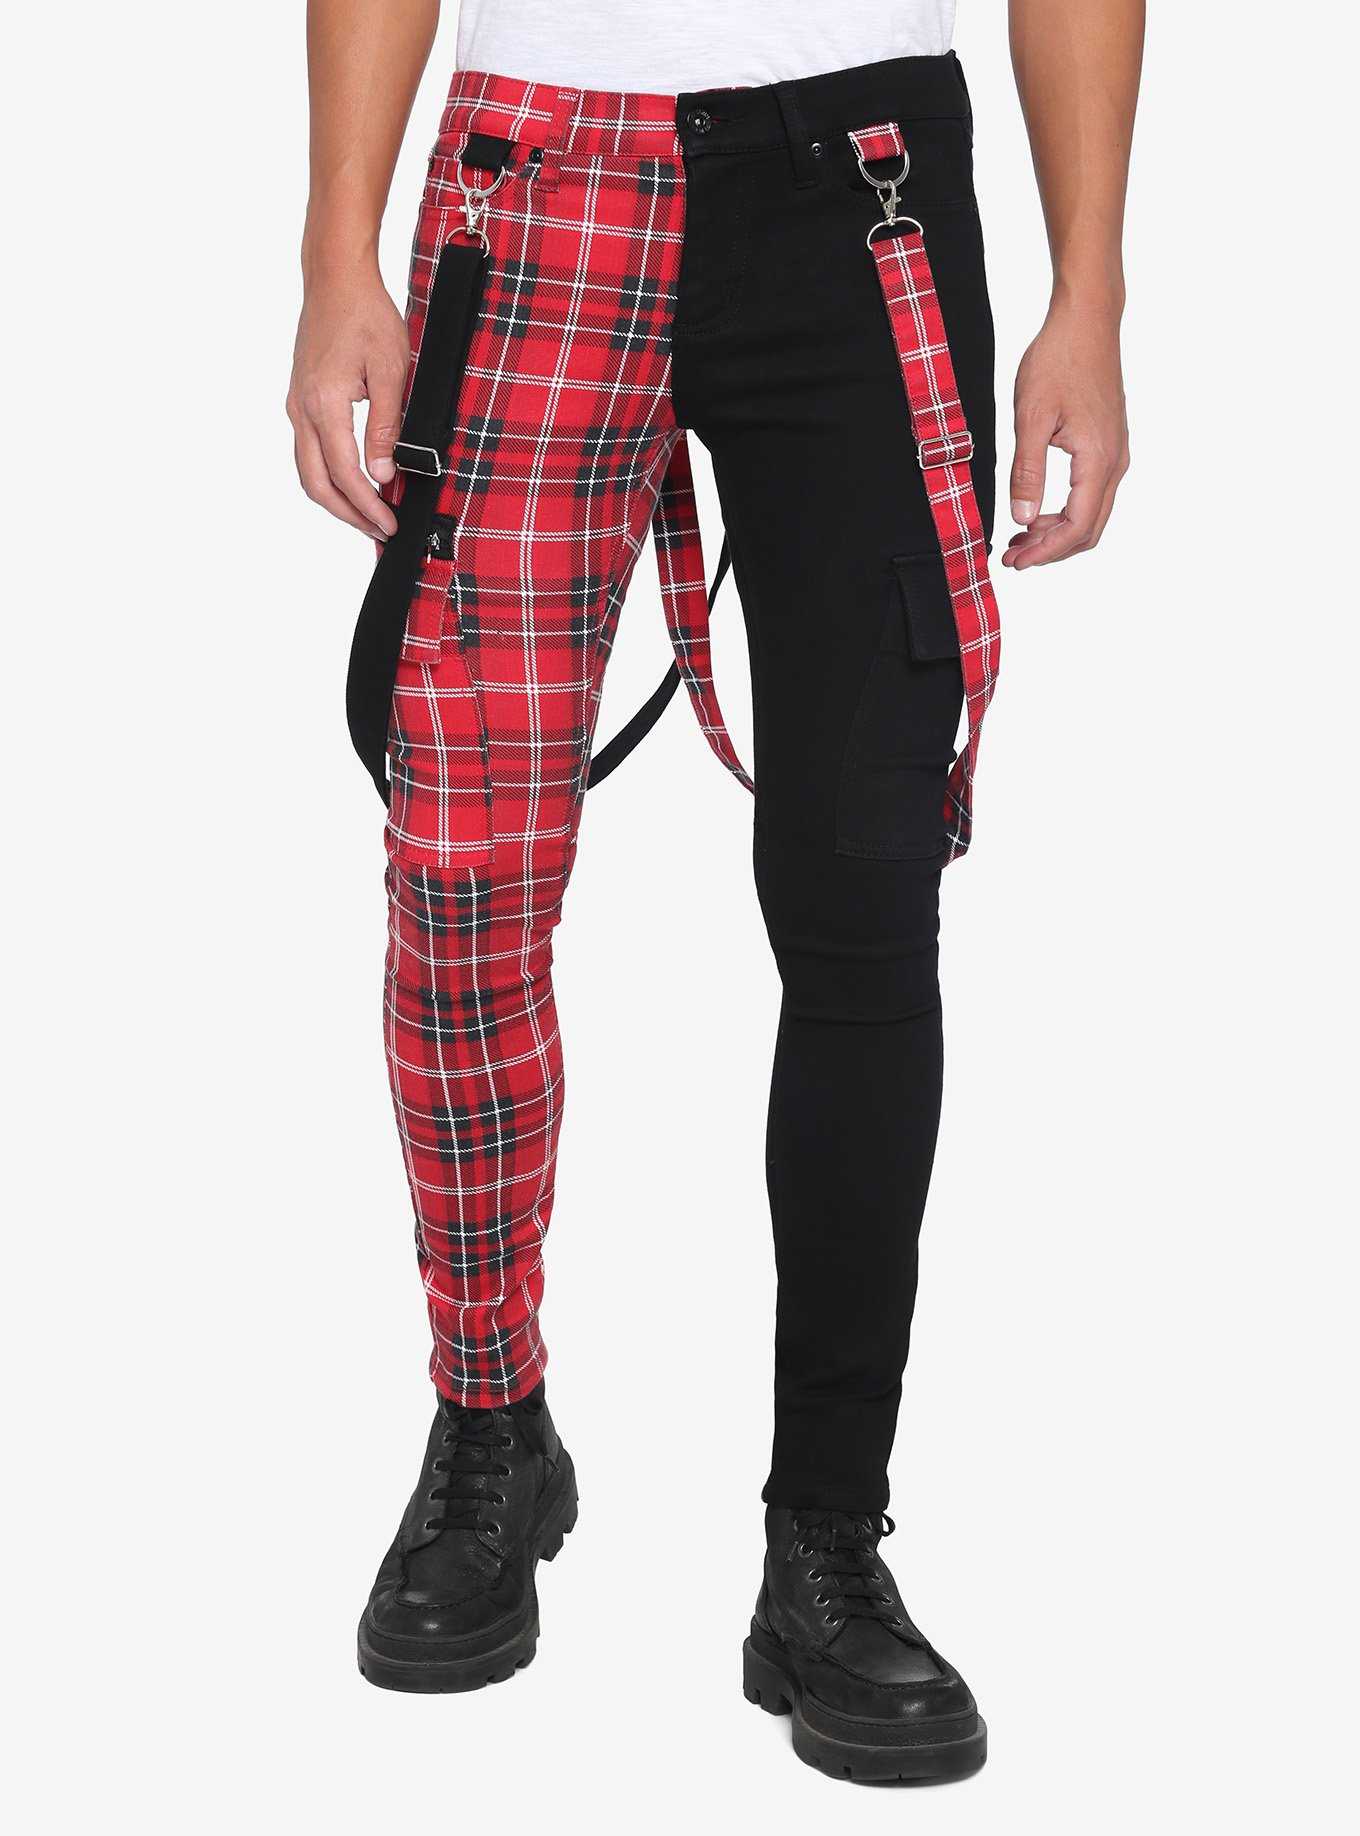 Hot Topic Plaid Pants With Chain Black Size XXL - $15 (55% Off Retail) -  From Justice